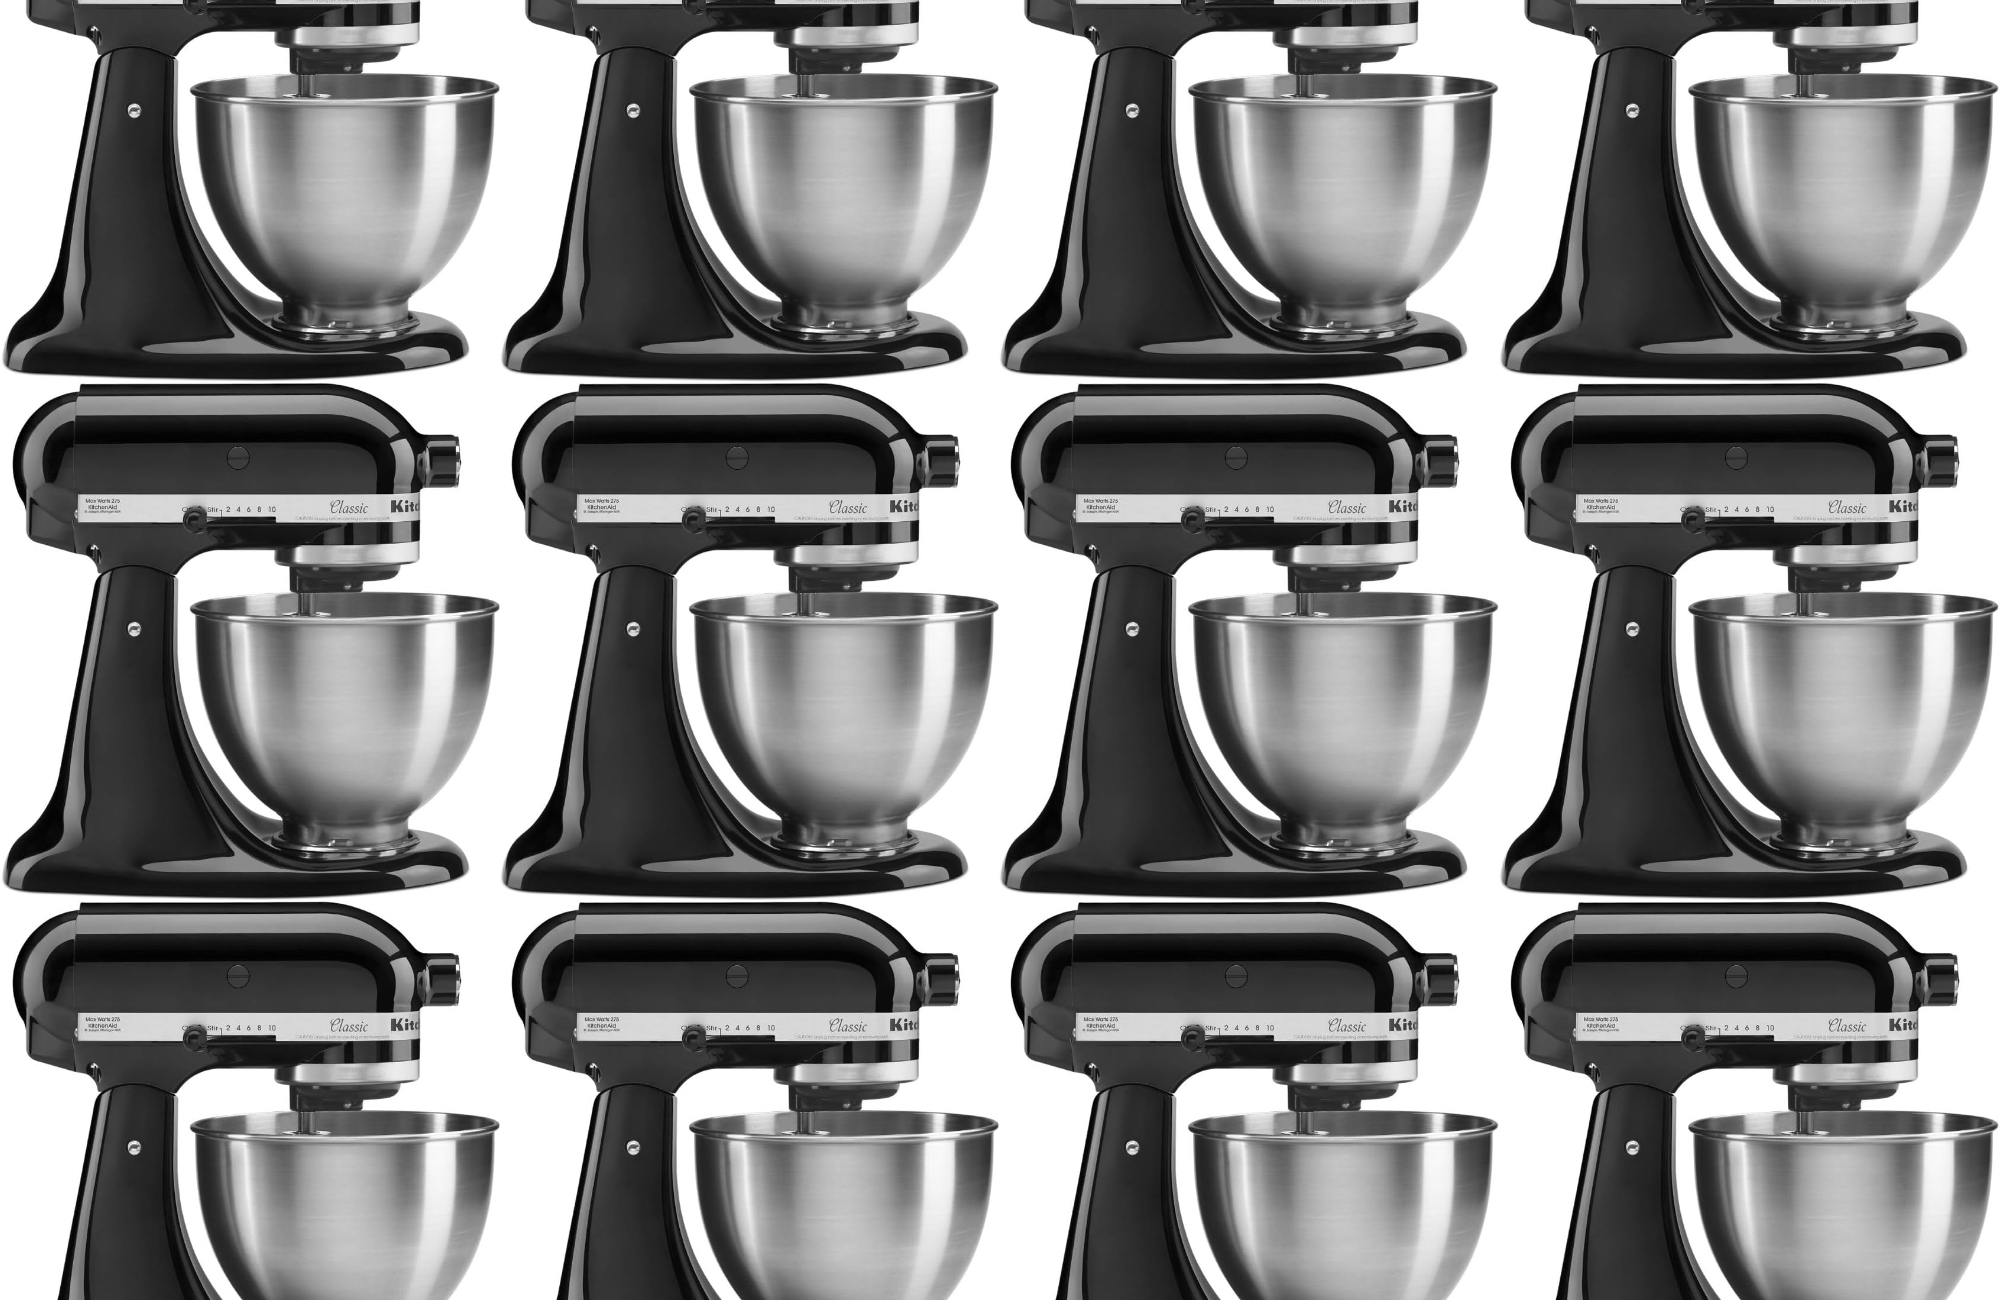 A tiled sequence of the KitchenAid Classic Series 4.5 Quart Tilt-Head Stand Mixer.